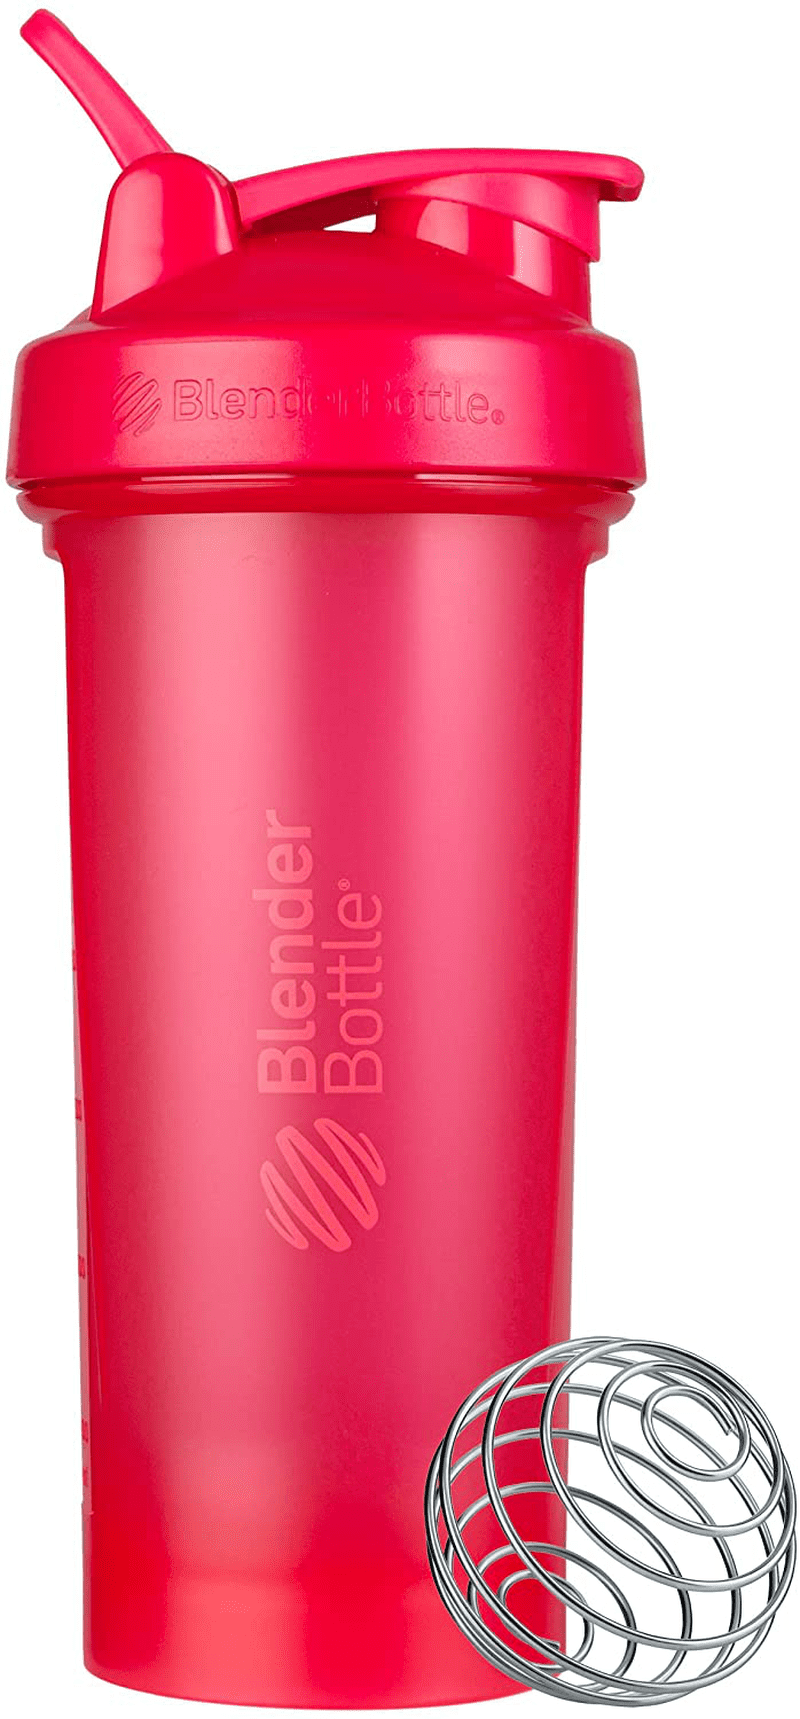 Protein Shaker Bottle Blender for Shake and Pre Work Out, Best Shaker Cup  (BPA free) w. Classic Loop…See more Protein Shaker Bottle Blender for Shake